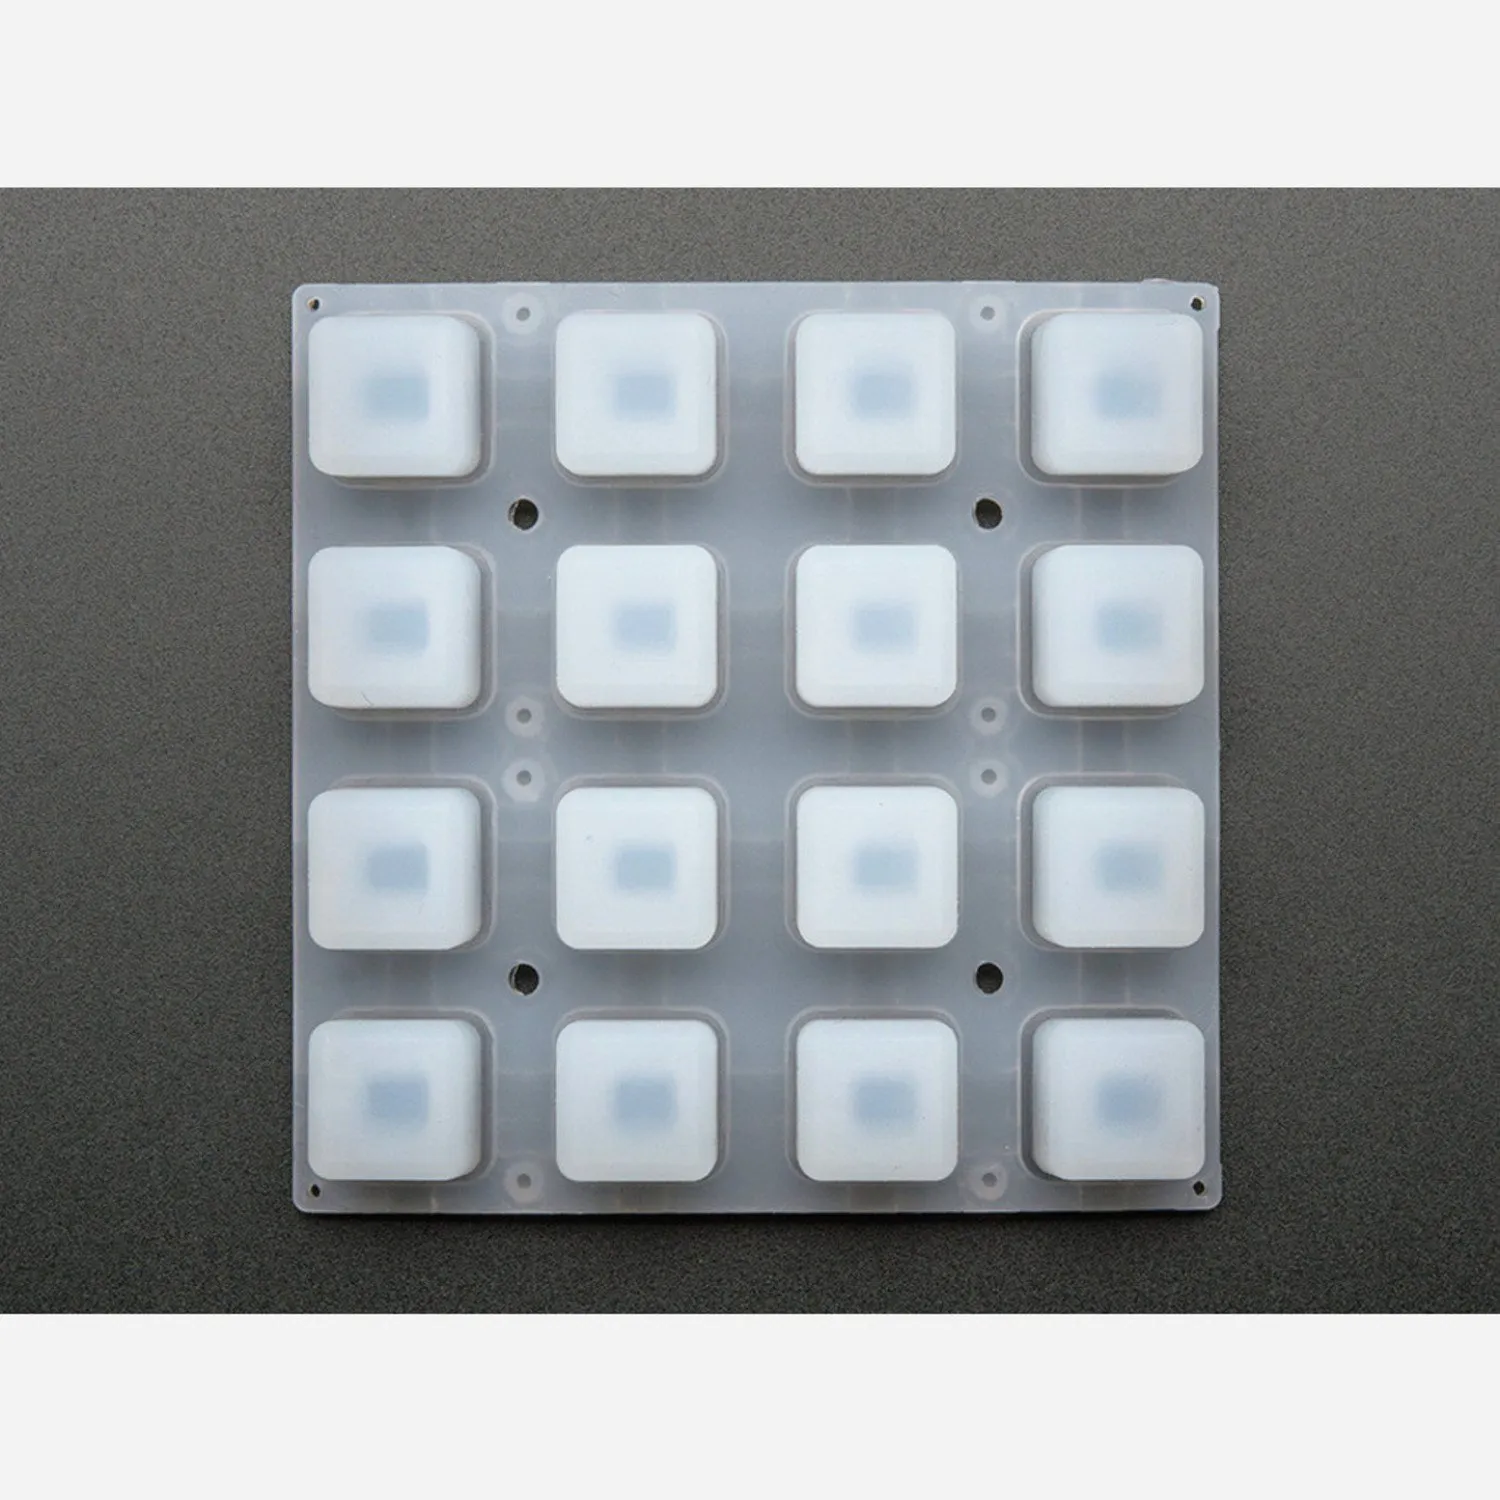 Photo of Silicone Elastomer 4x4 Button Keypad - for 3mm LEDs